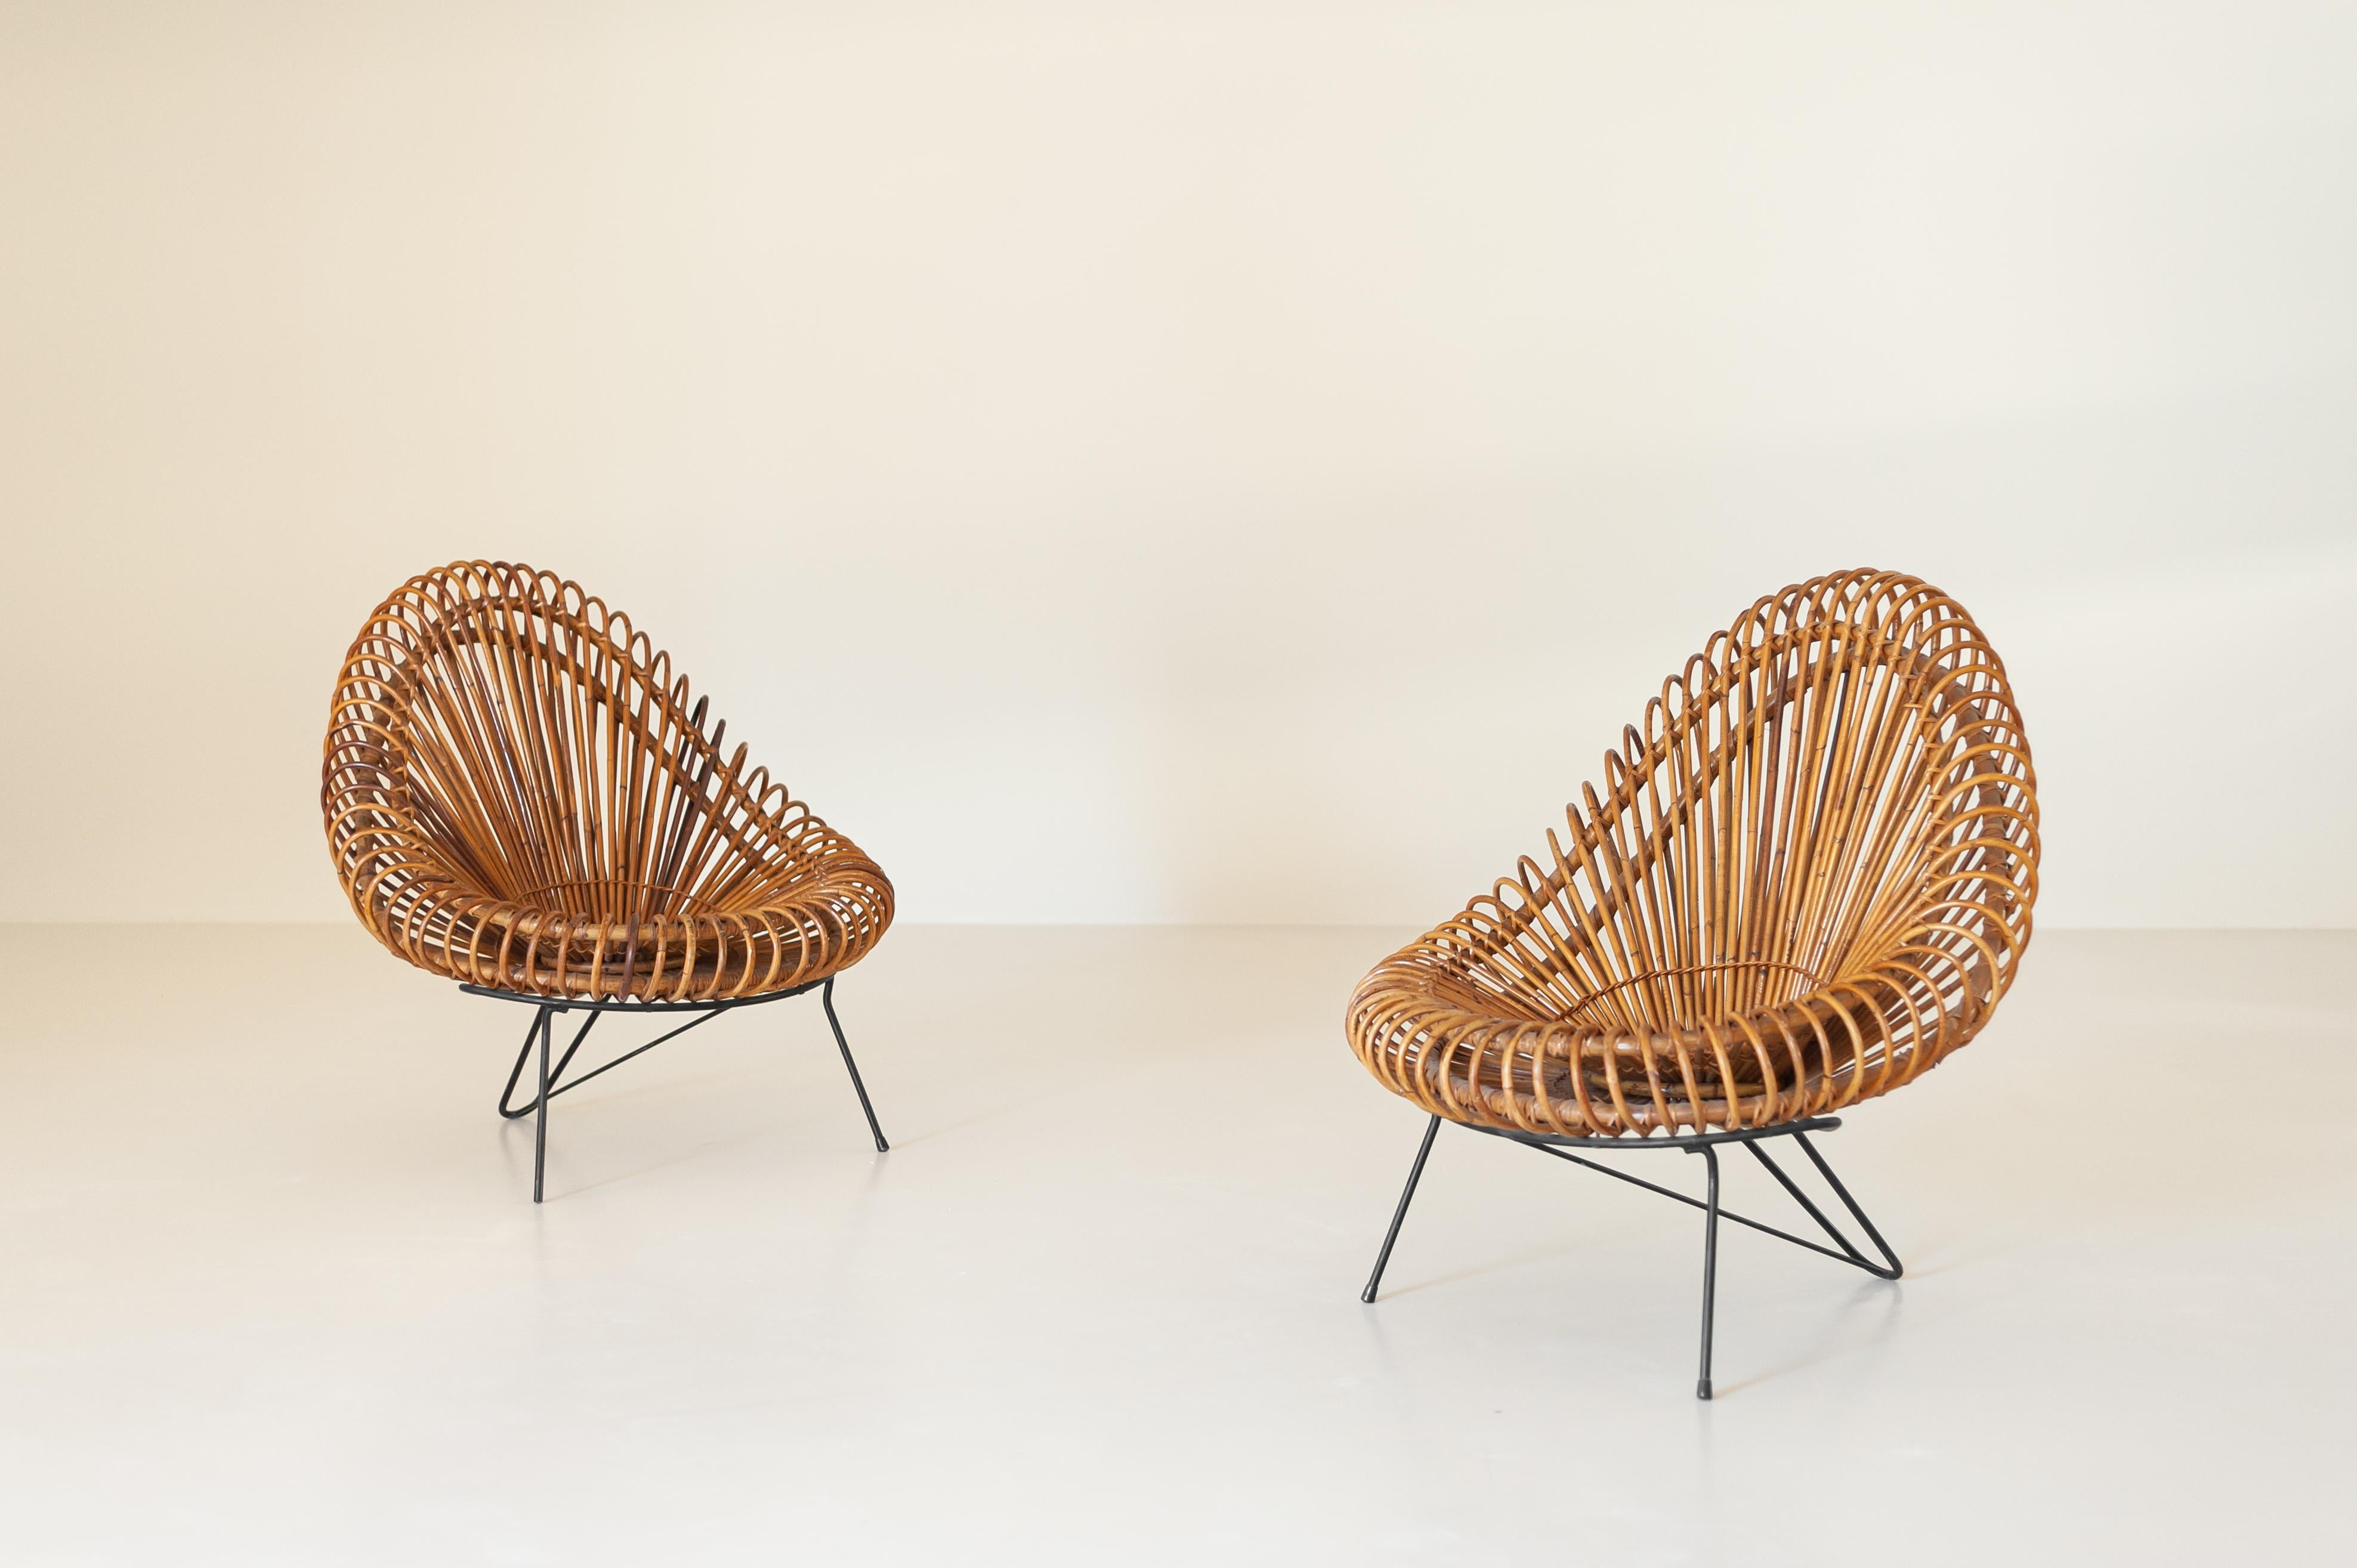 A pair of charming lounge chairs designed by Janine Abraham & Dirk Jan Rol and produced by Edition Rougier in the 1955.
The main characteristic of this model is its sculptural handmade natural basket seat which form an appealing shell shape resting